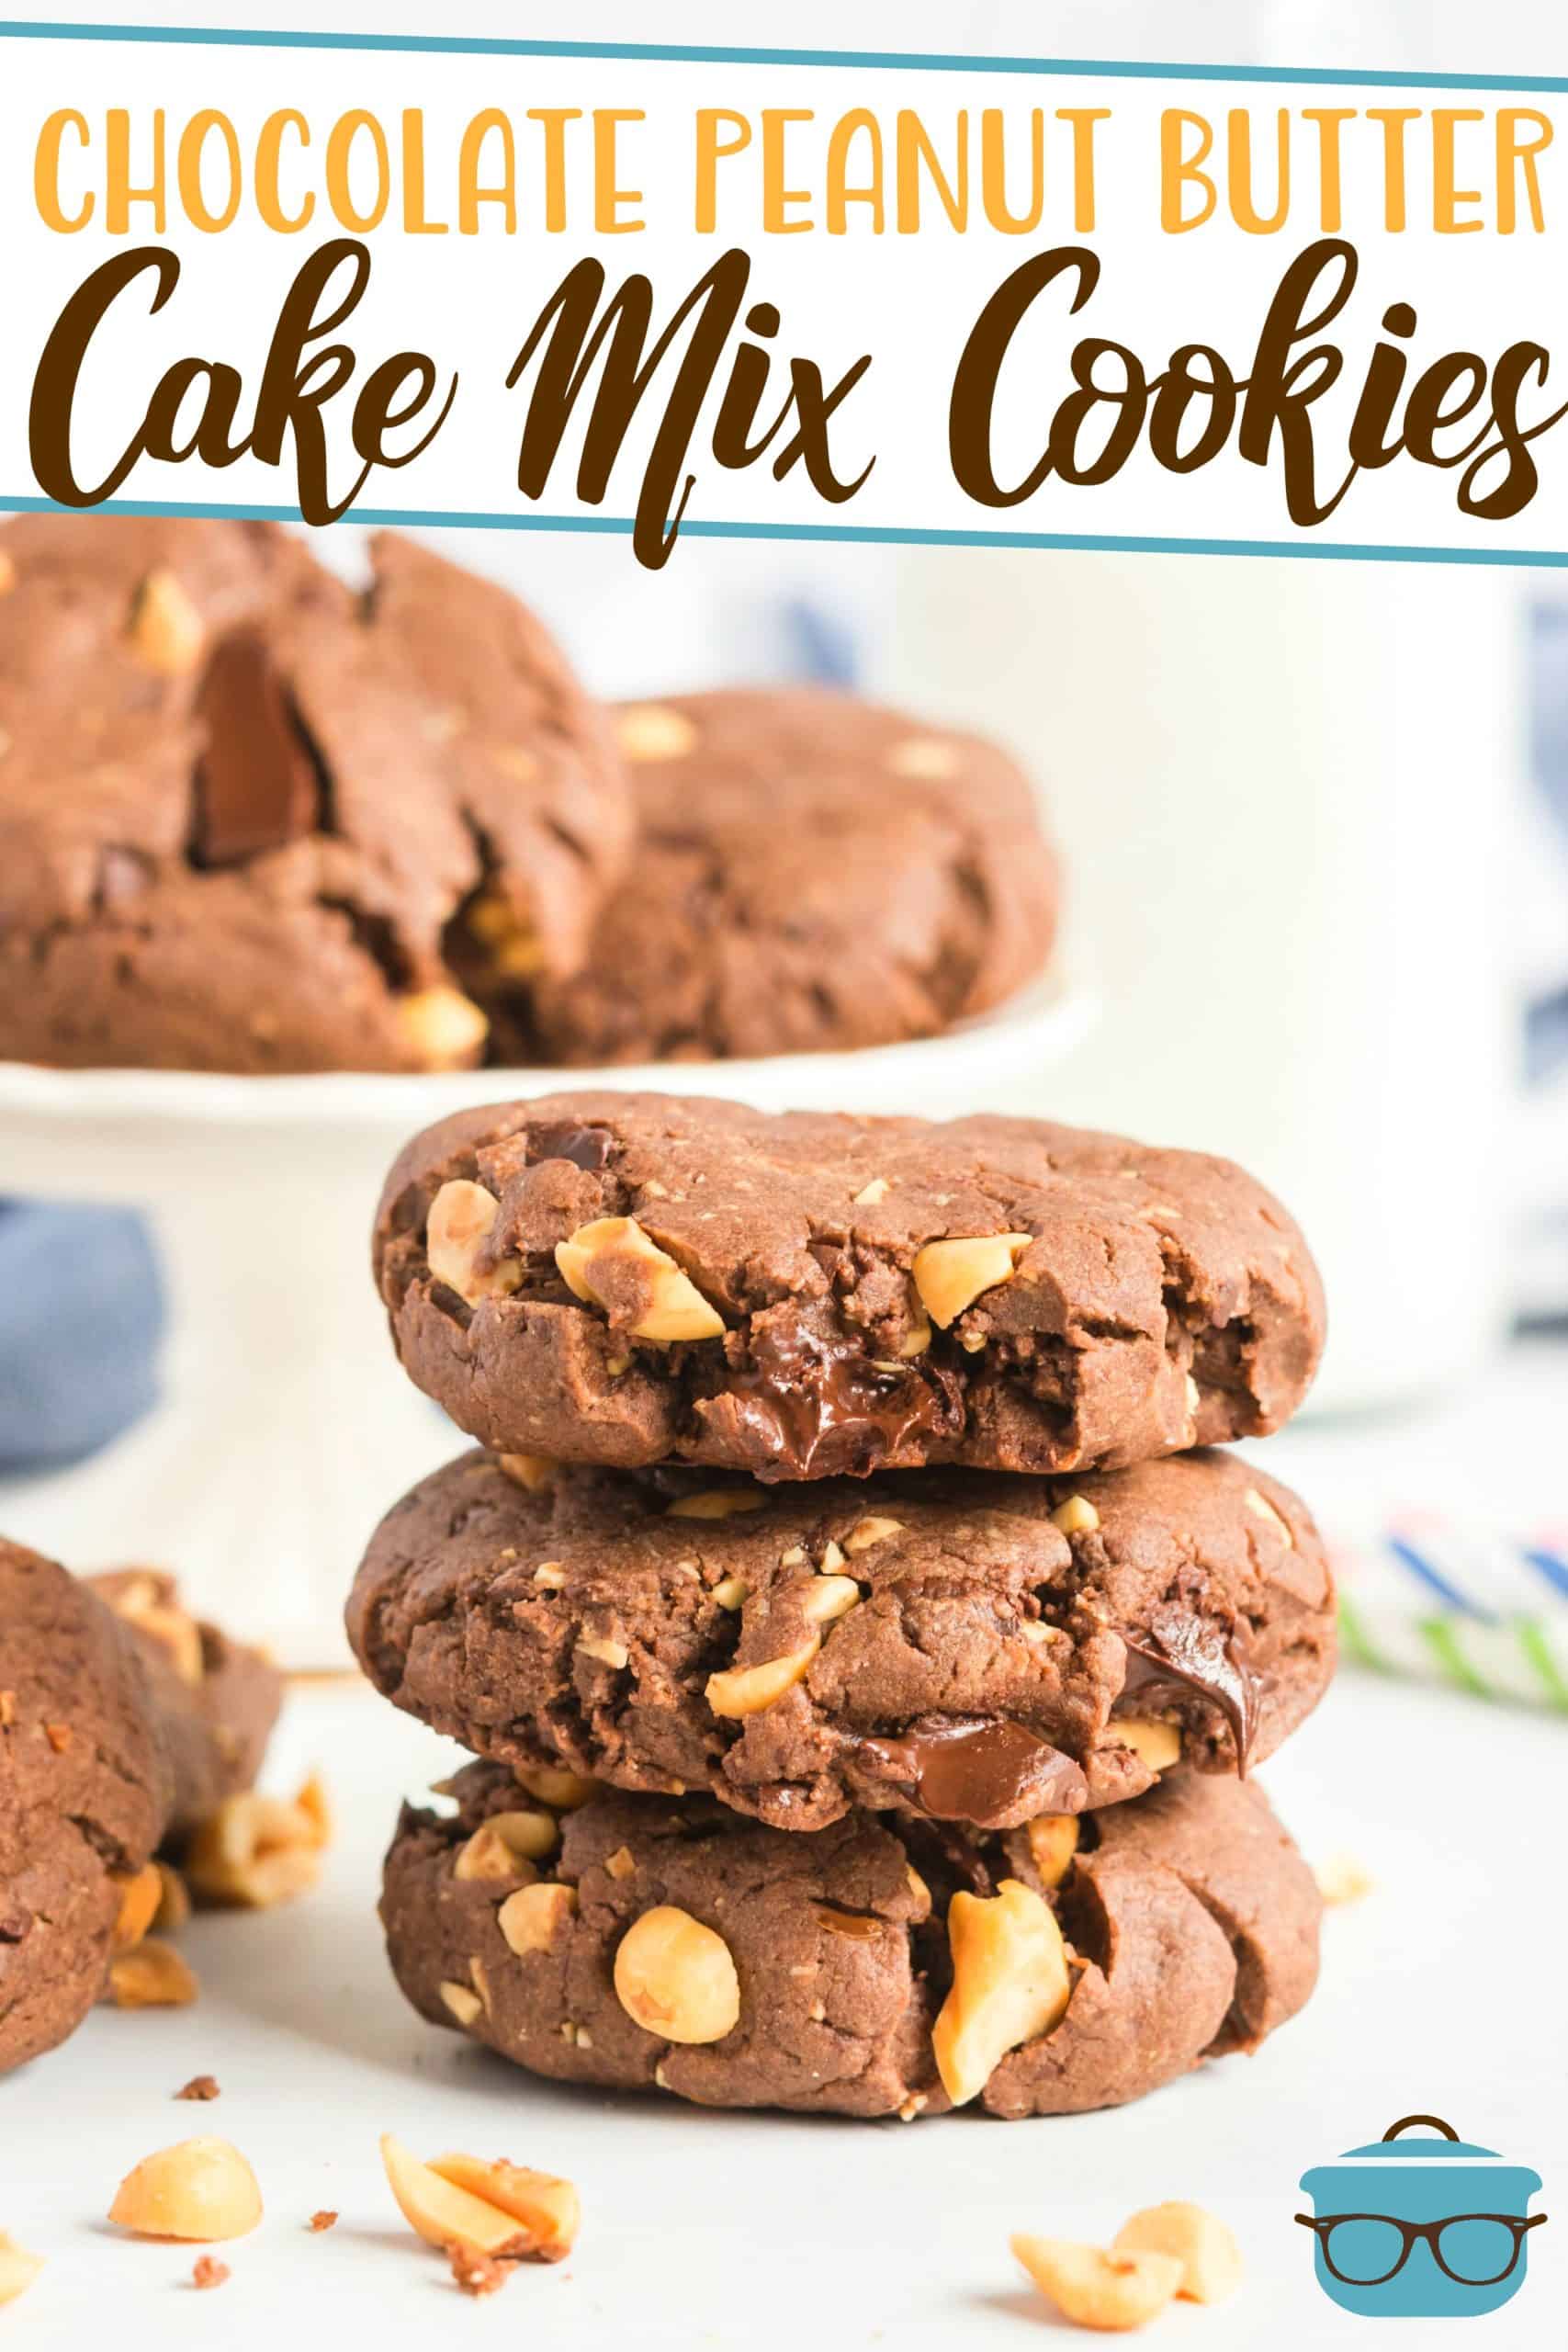 Chocolate Peanut Butter Cake Mix Cookies recipe from the Country Cook, cookies shown stacked with scattered chopped peanuts around them.